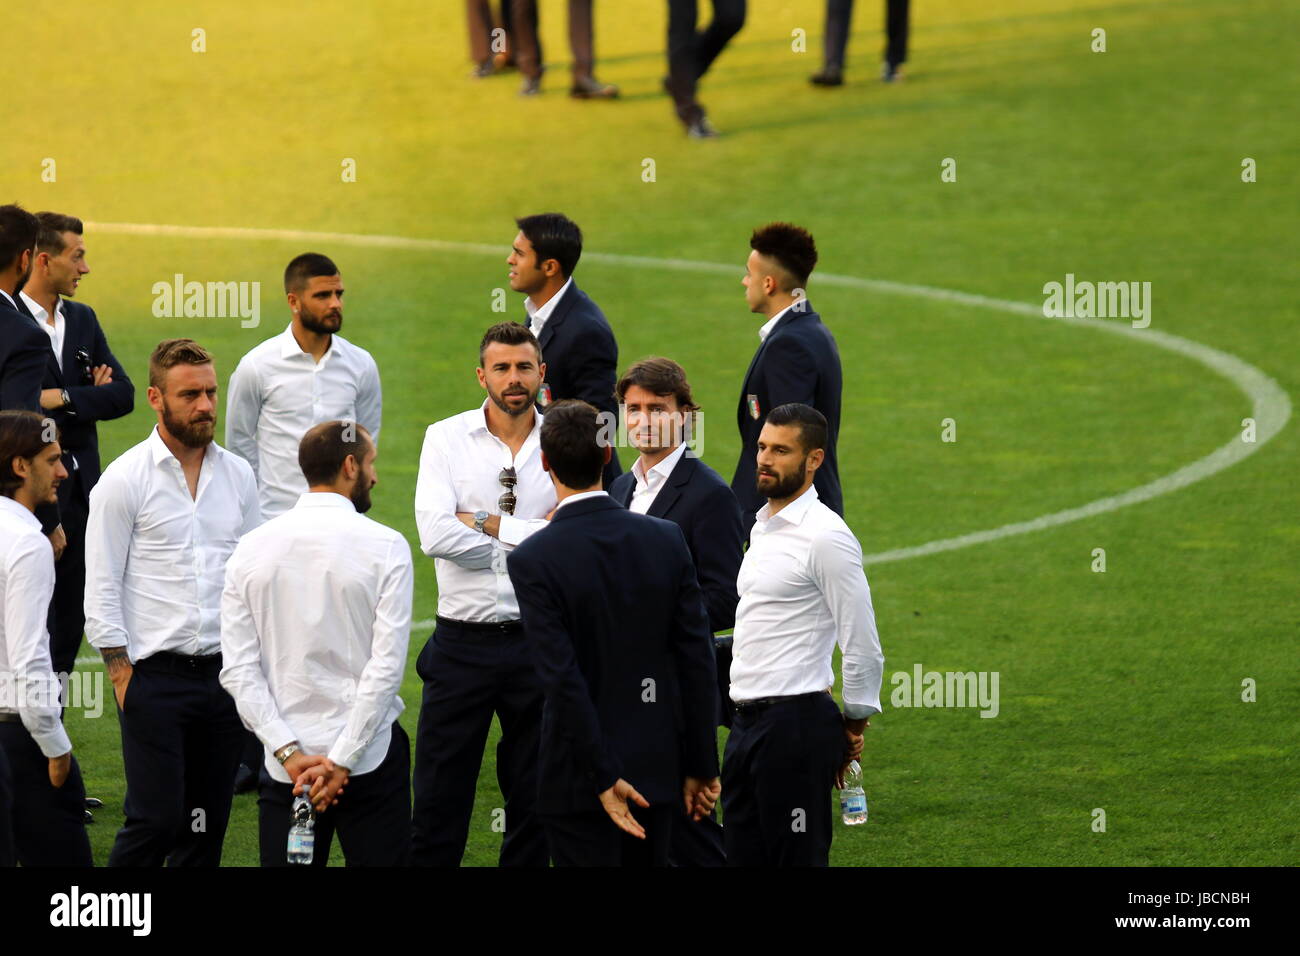 Udine, Friuli Venezia Giulia. 10th June, 2017. ITALY, Udine: Italy's players Daniele De Rossi, Citadin Martins Eder, Ciro Immobile, Riccardo Montolivo, Antonio Candreva speaks during a 'Italy walk around' on the eve of the FIFA World Cup 2018 qualification football match between Italy and Liechtenstein at Dacia Arena Stadium on 10th June, 2017. Credit: Andrea Spinelli/Alamy Live News Stock Photo